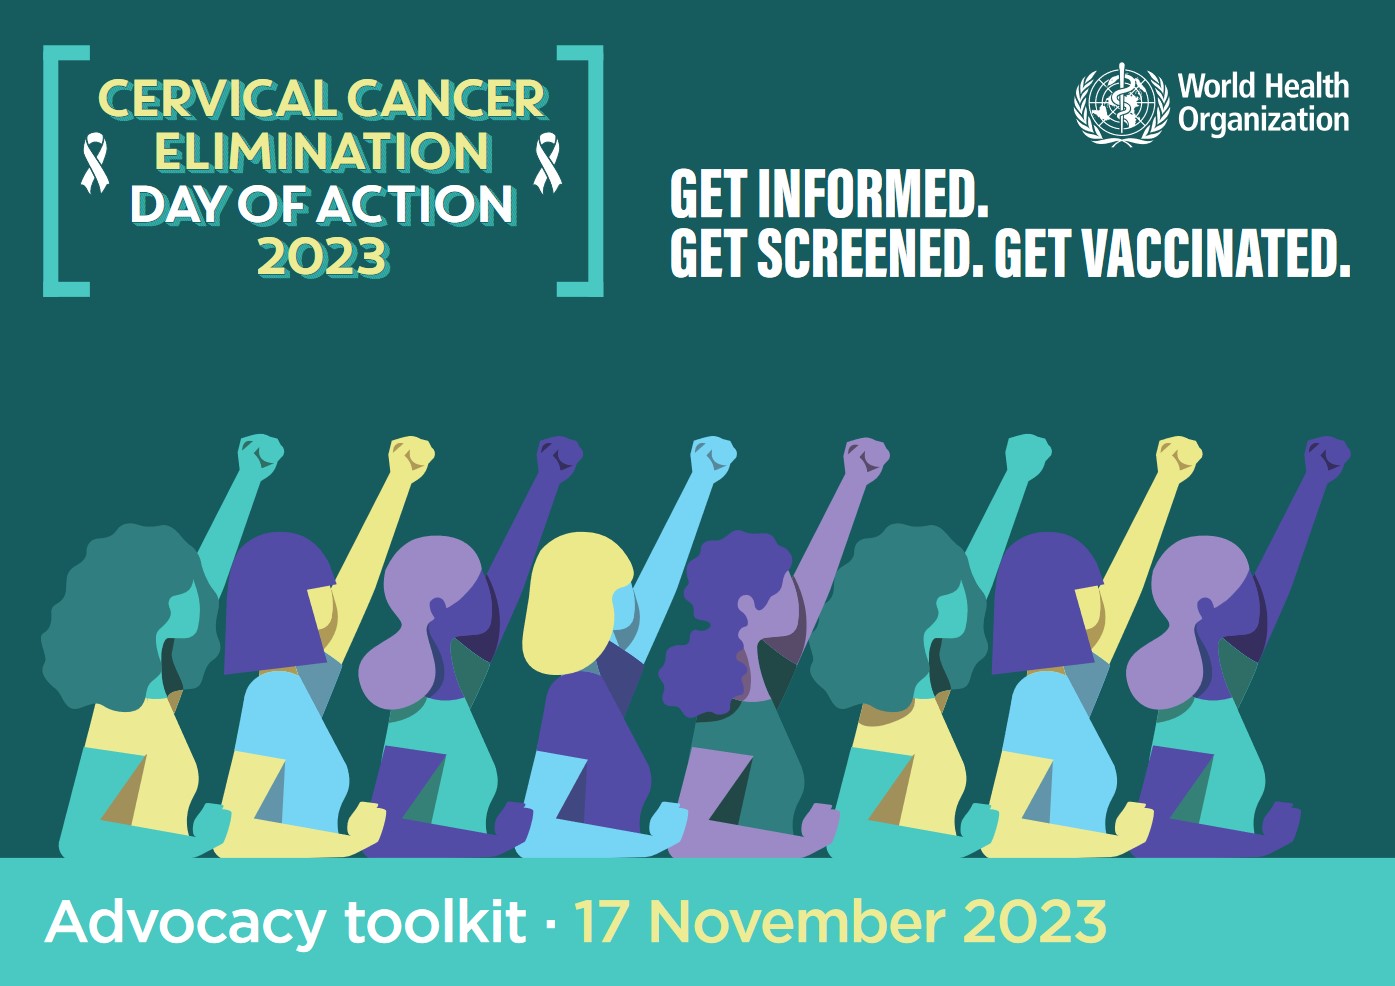  Cervical cancer elimination day of action 2023: Advocacy toolkit